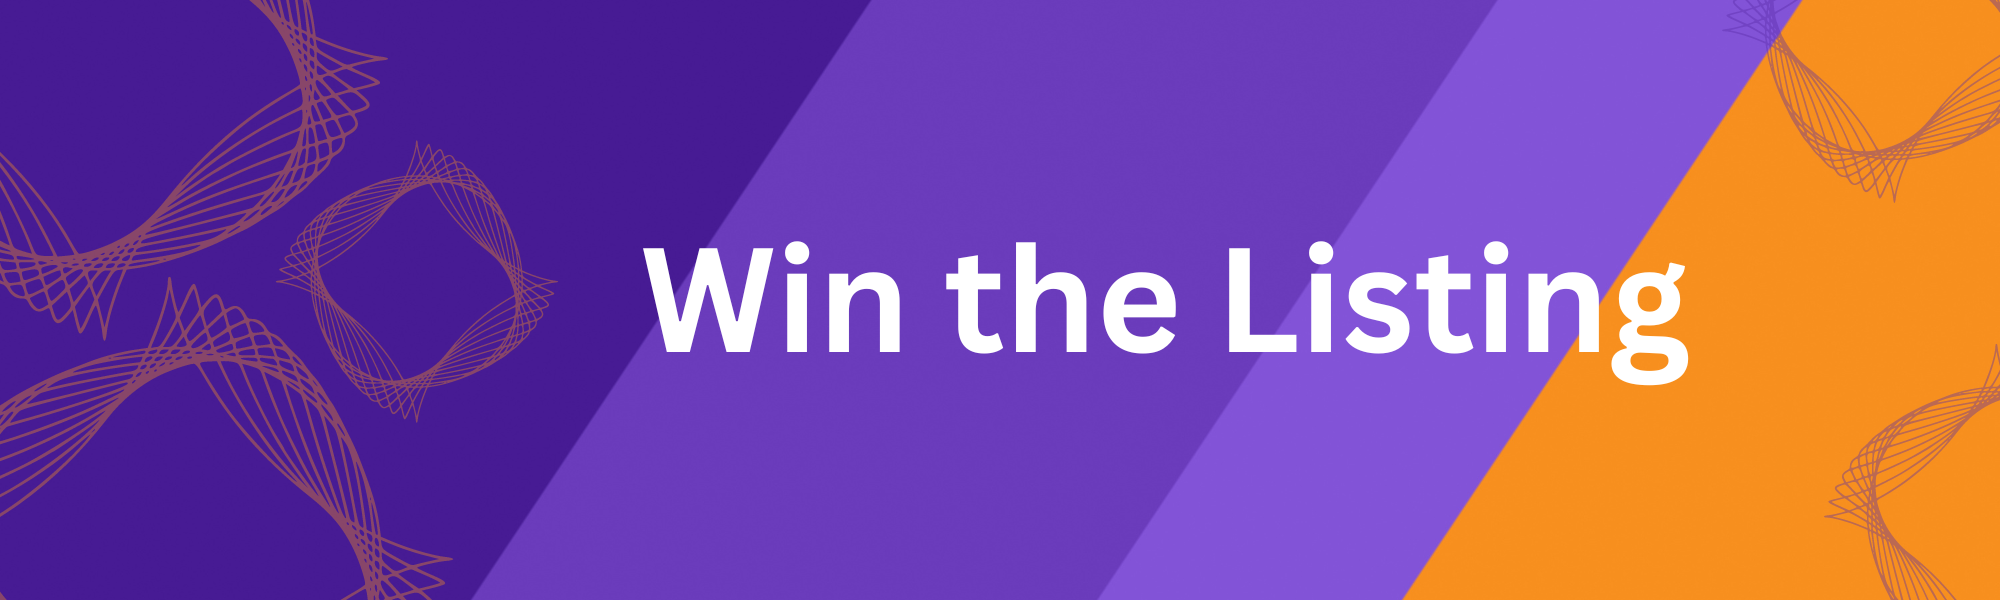 Win the Listing